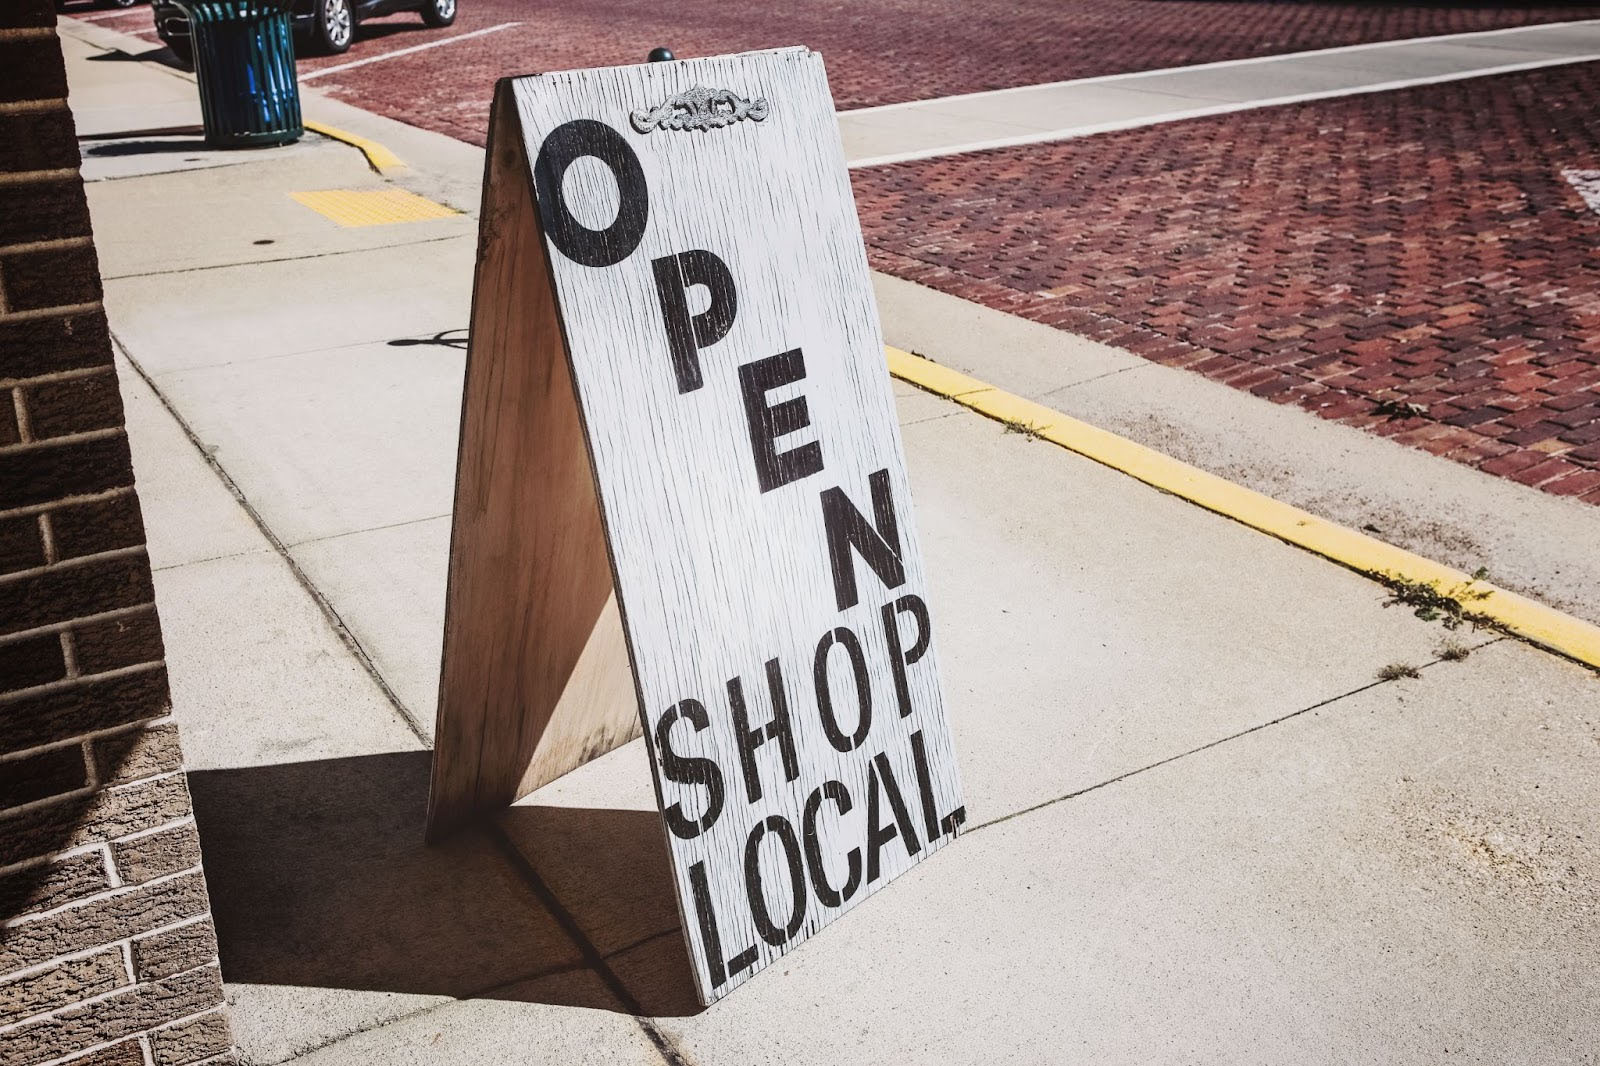 A sandwich board that reads "OPEN SHOP LOCAL" set up on a sidewalk next to a building.